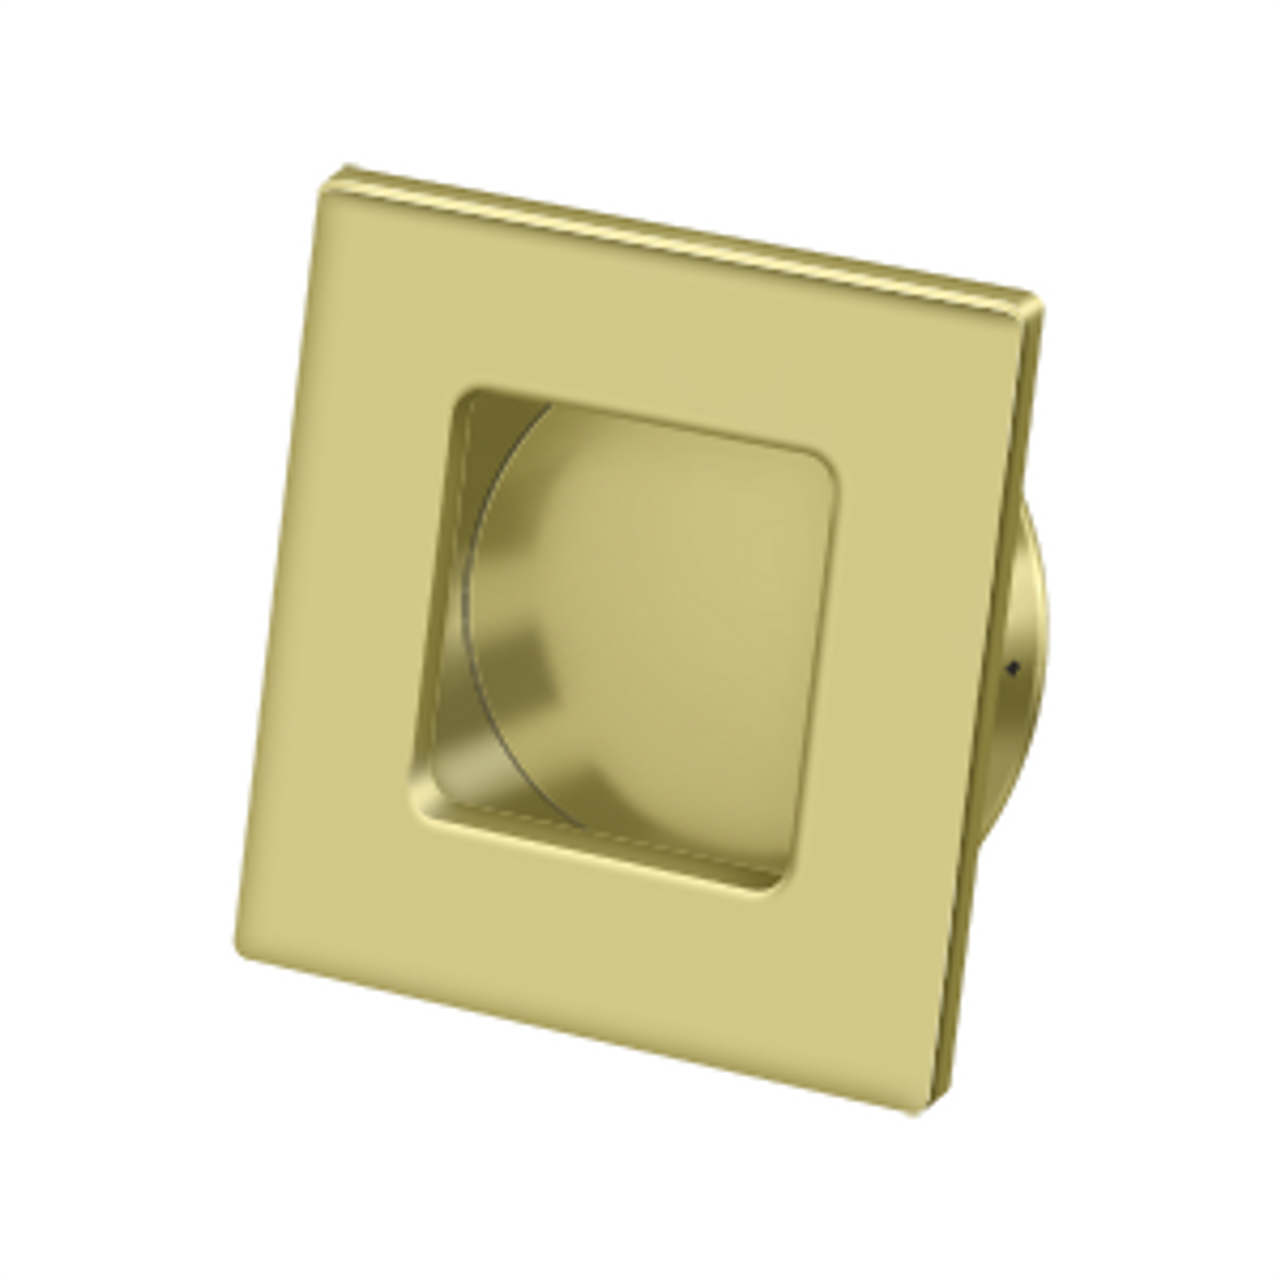 Deltana FRS234 FLUSH PULL, SQUARE, HD, 2-3/4" X 2-3/4", SOLID BRASS